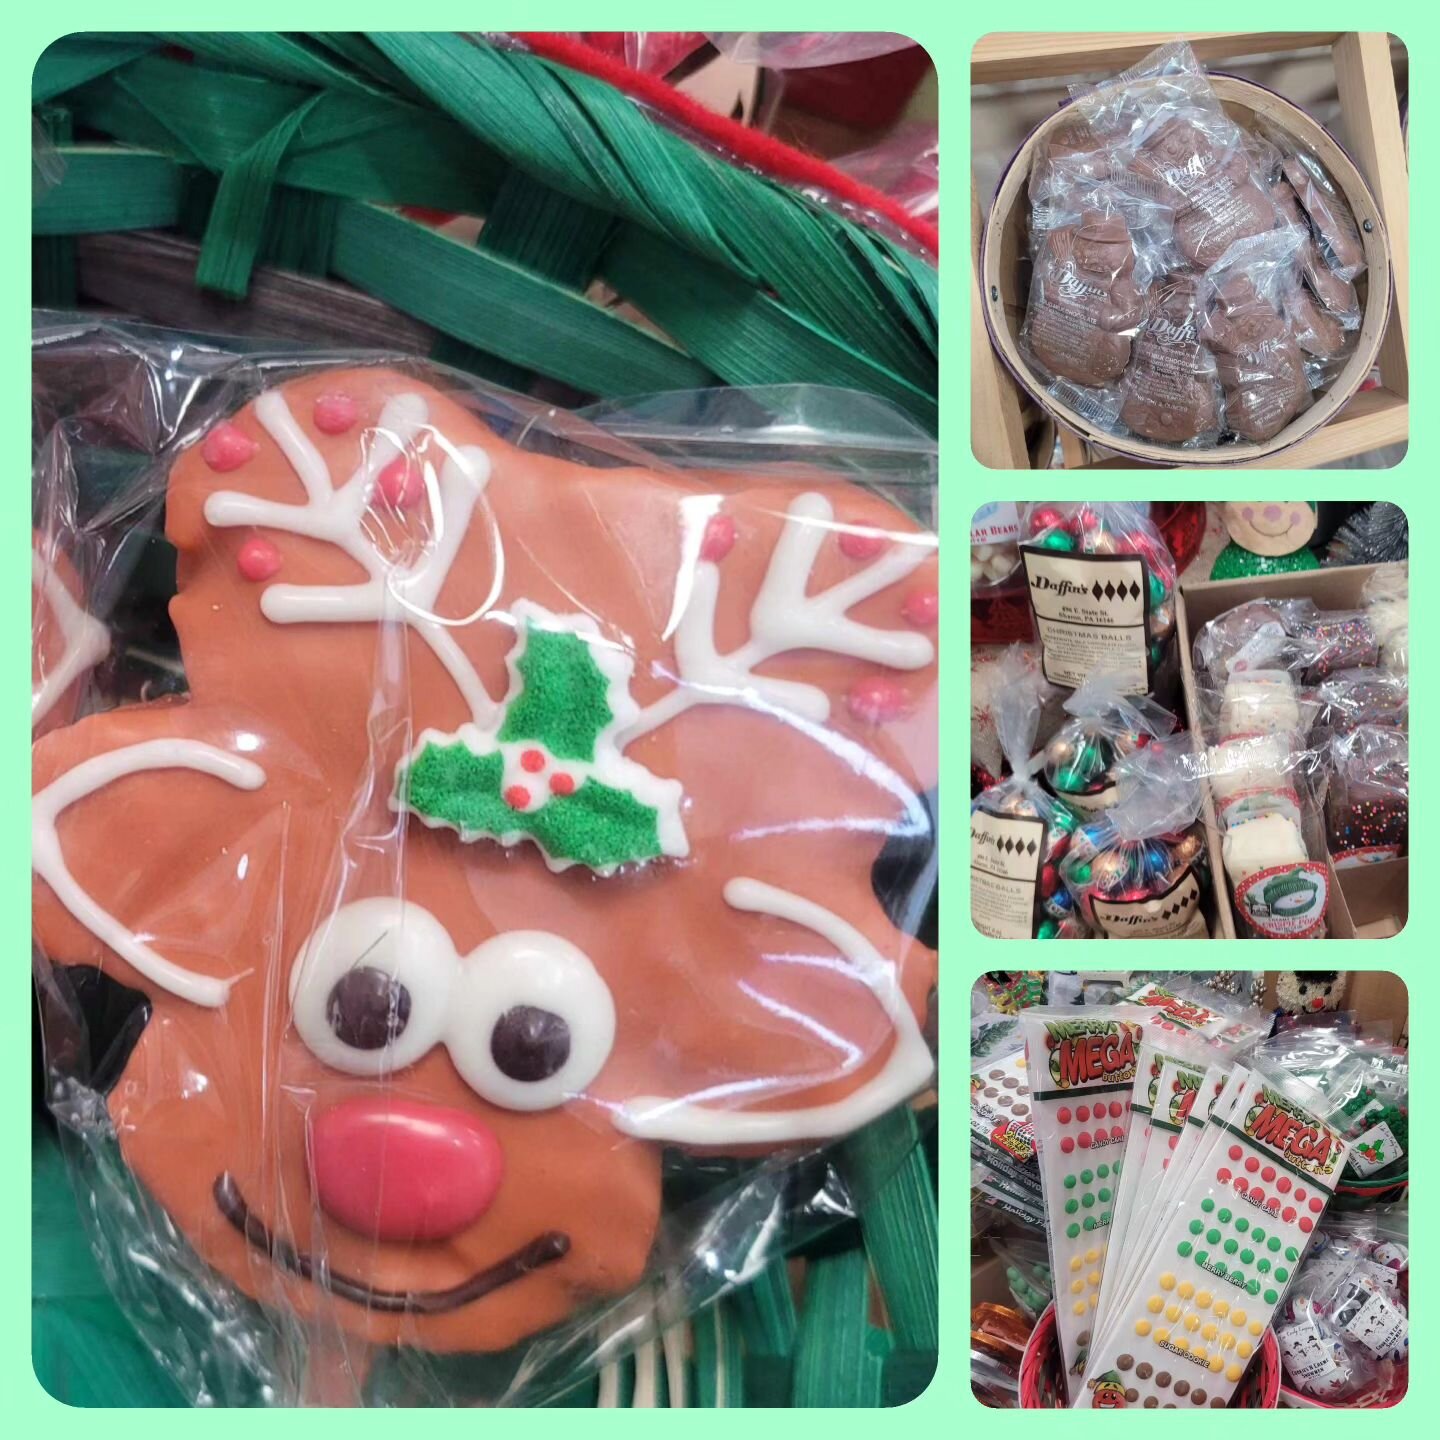 Lots of Christmas candy still available at 50% off!! Stop in and get some sweet treats for your New Years Eve celebrations.